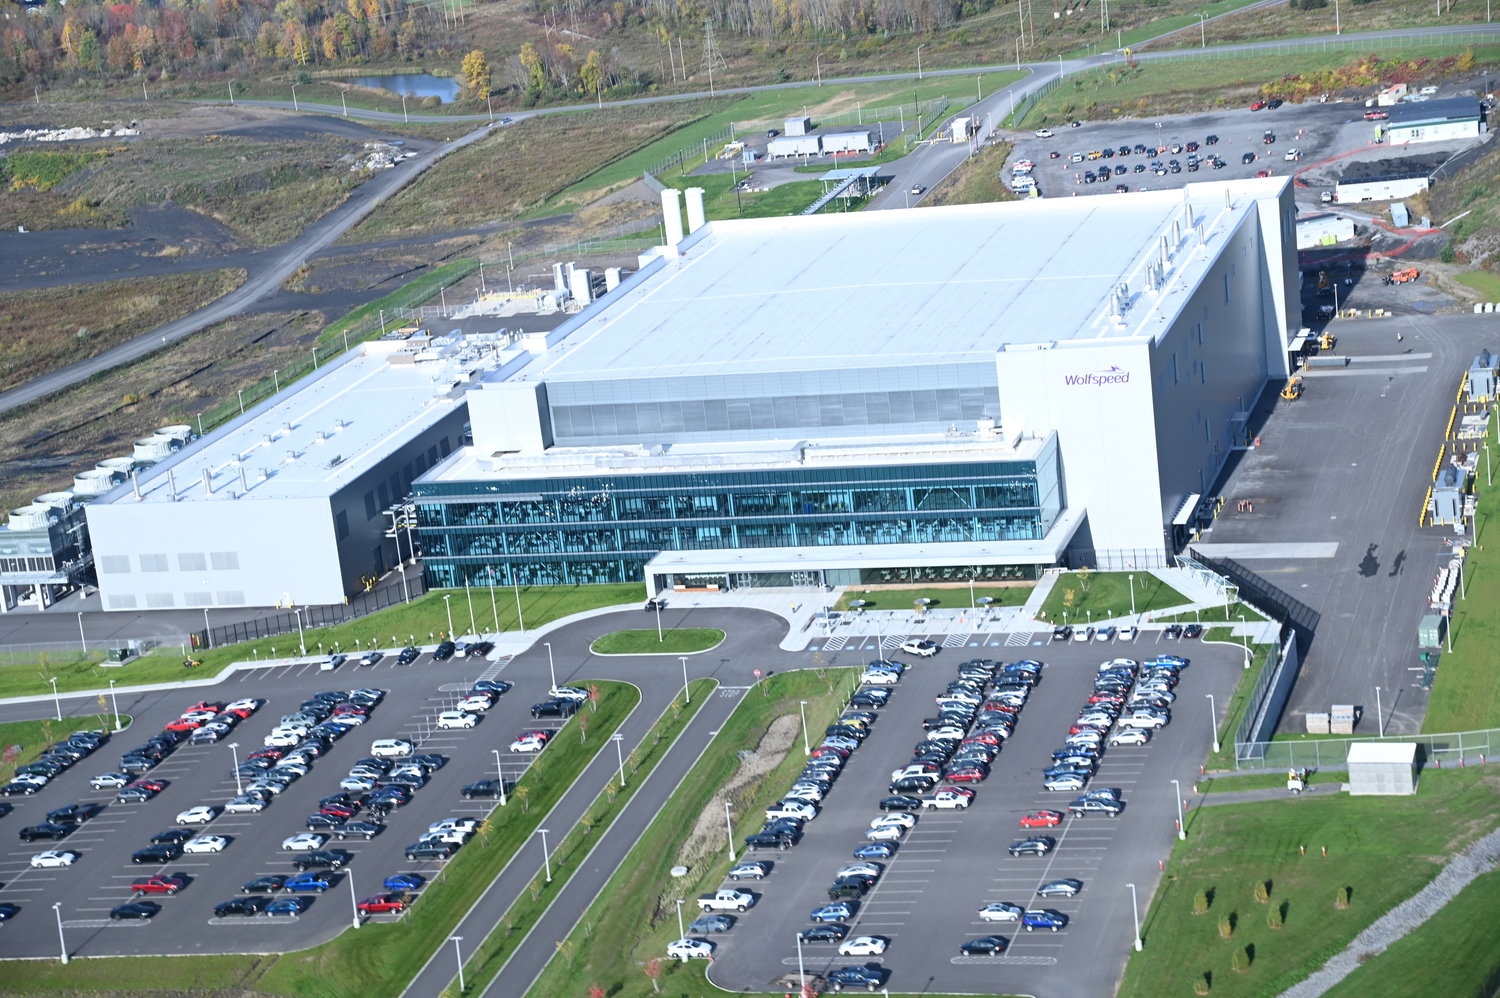 The silicon carbide power devices for Mercedes-Benz will be produced at Wolfspeed’s facilities in Durham, N.C. and its new 200mm Mohawk Valley Fab in Marcy. Pictured is the Wolfspeed facility in Marcy.